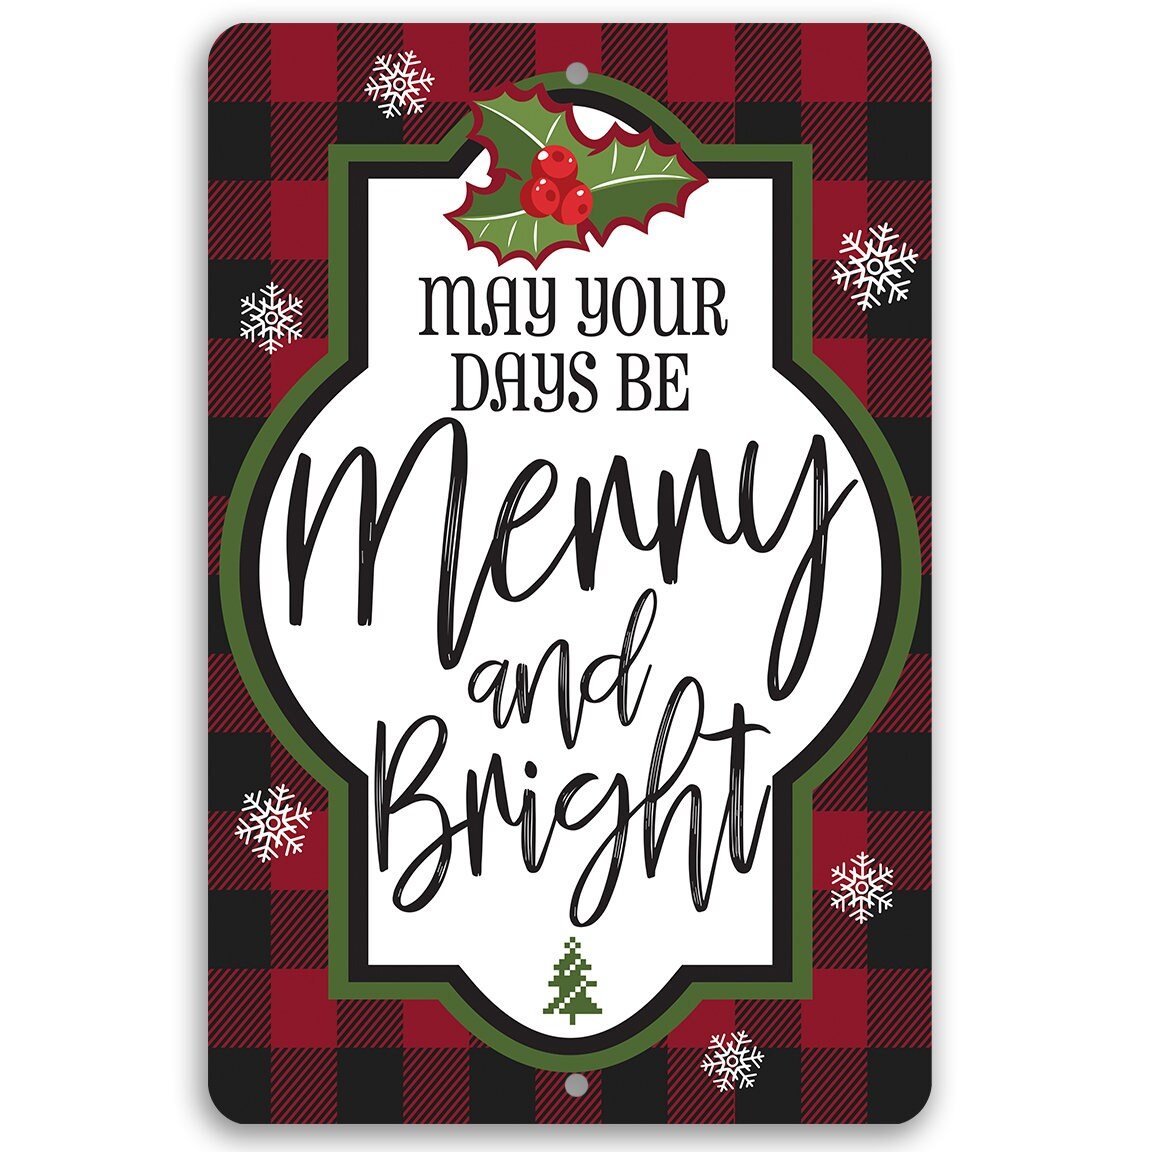 May Your Days Be Merry and Bright - Metal Sign Metal Sign Lone Star Art 